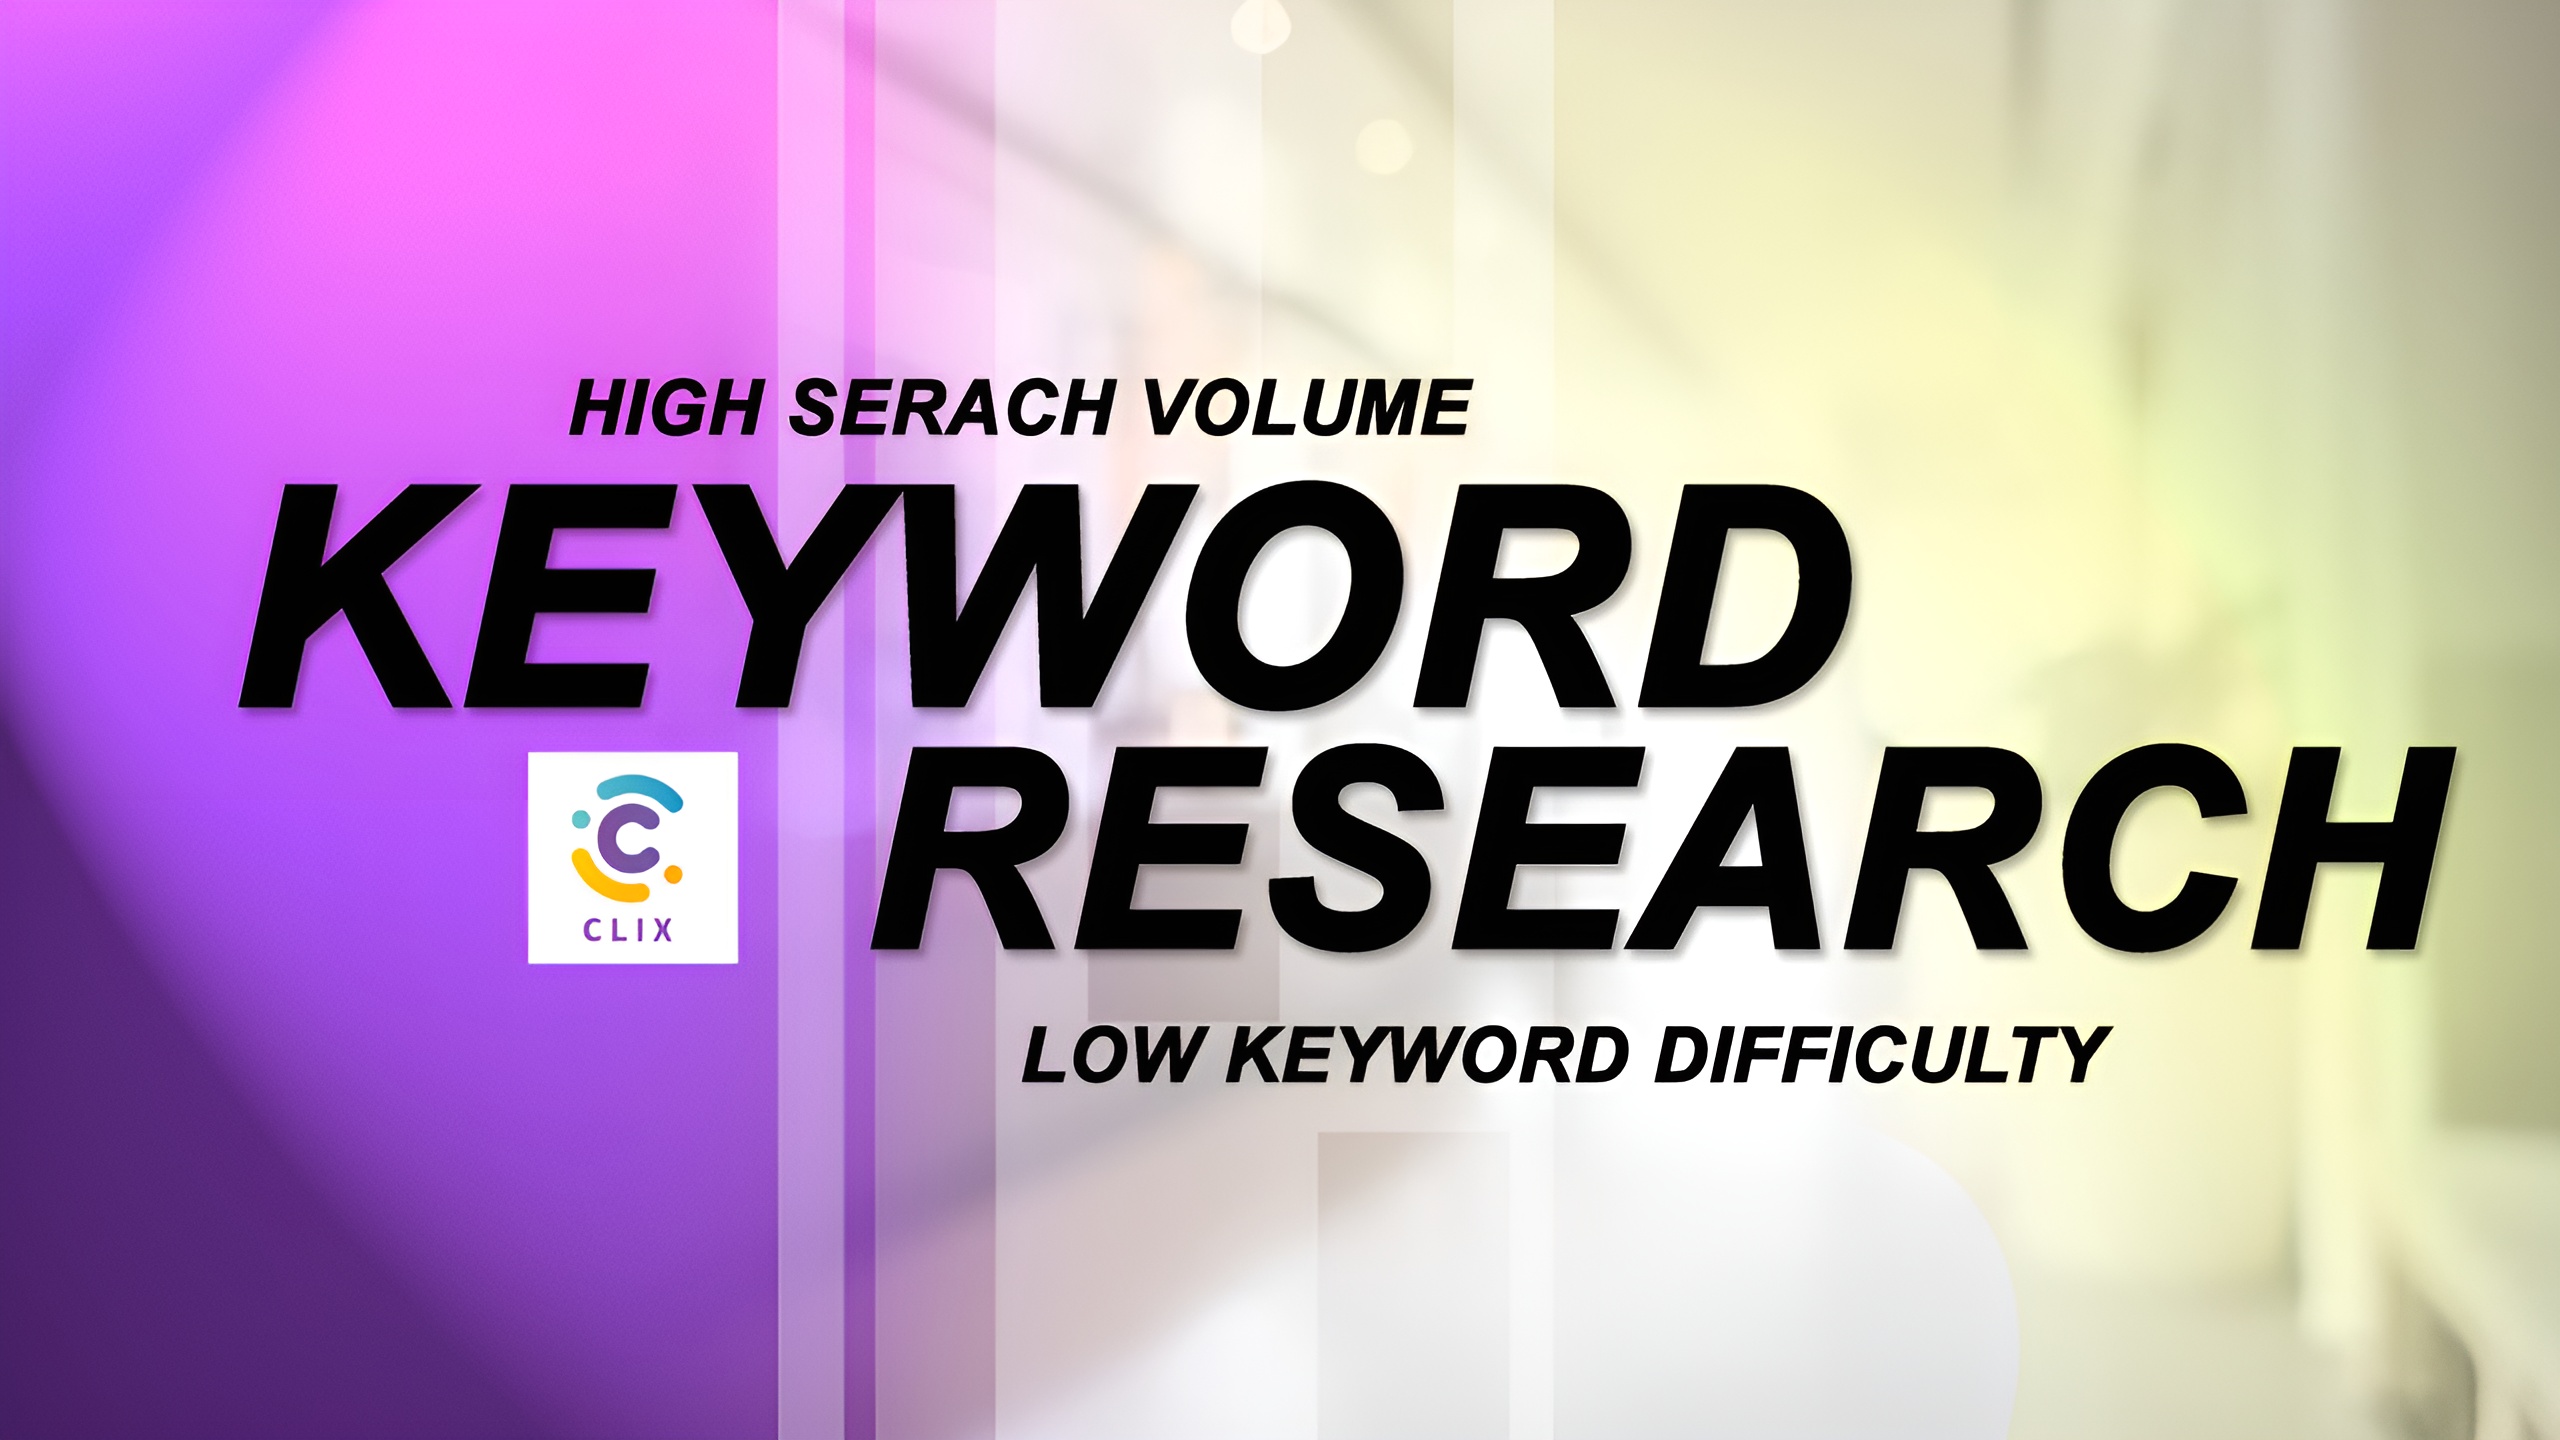  Targeted Keyword Research service for boost your site